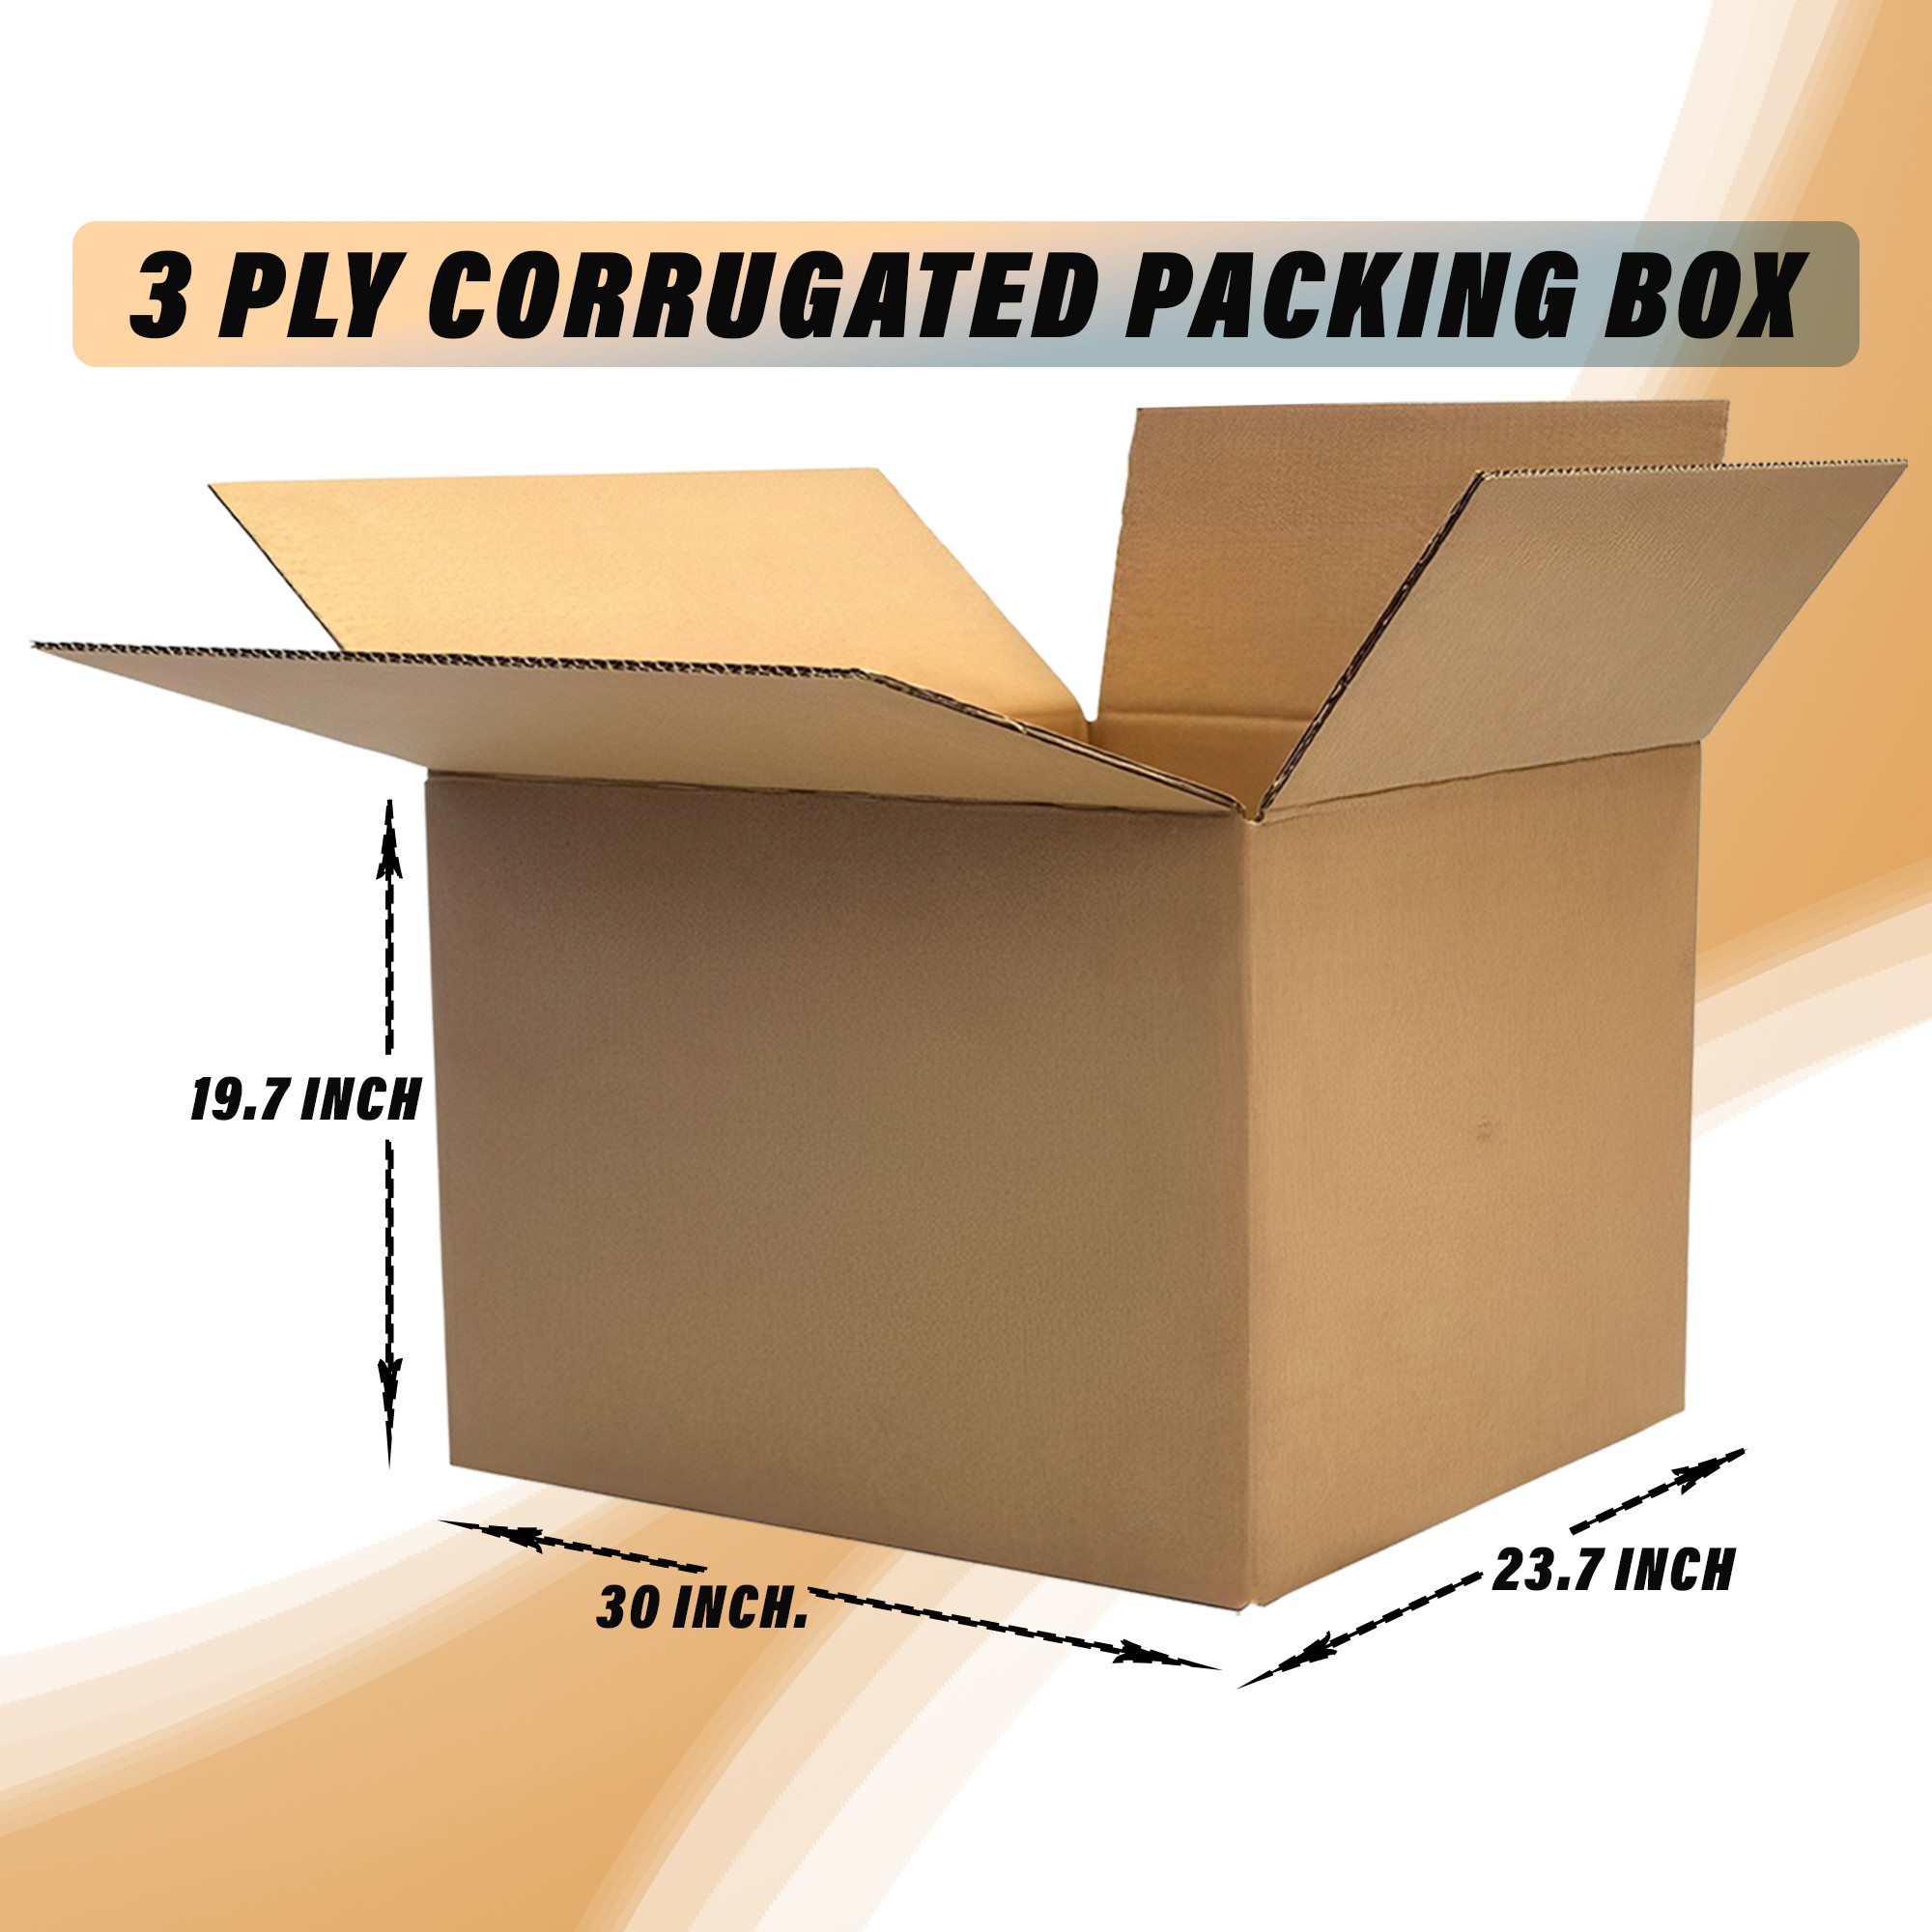 Kuber Industries Corrugated Box | 3 Ply Corrugated Packing Box | Corrugated for Shipping | Corrugated for Courier & Goods Transportation | L 30 x W 23.7 x H 19.7 Inch| Brown